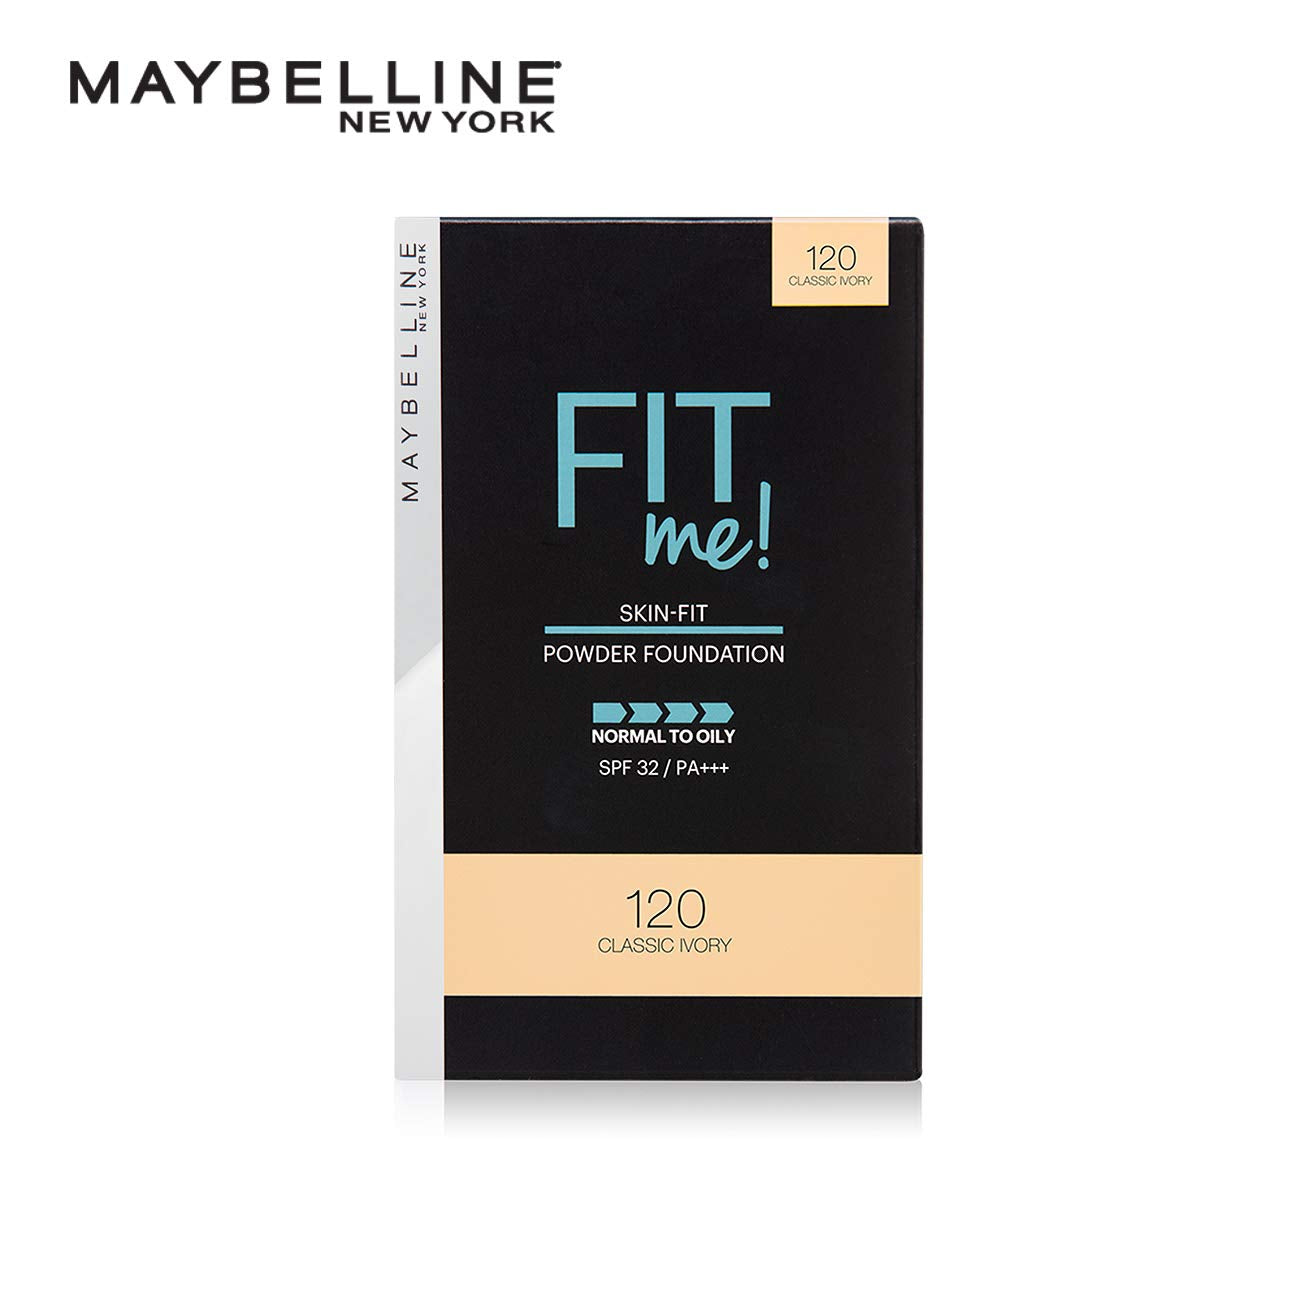 Maybelline New York Fit Me Two Way Cake (Powder Foundation), 120 Classic Ivory, 9 g